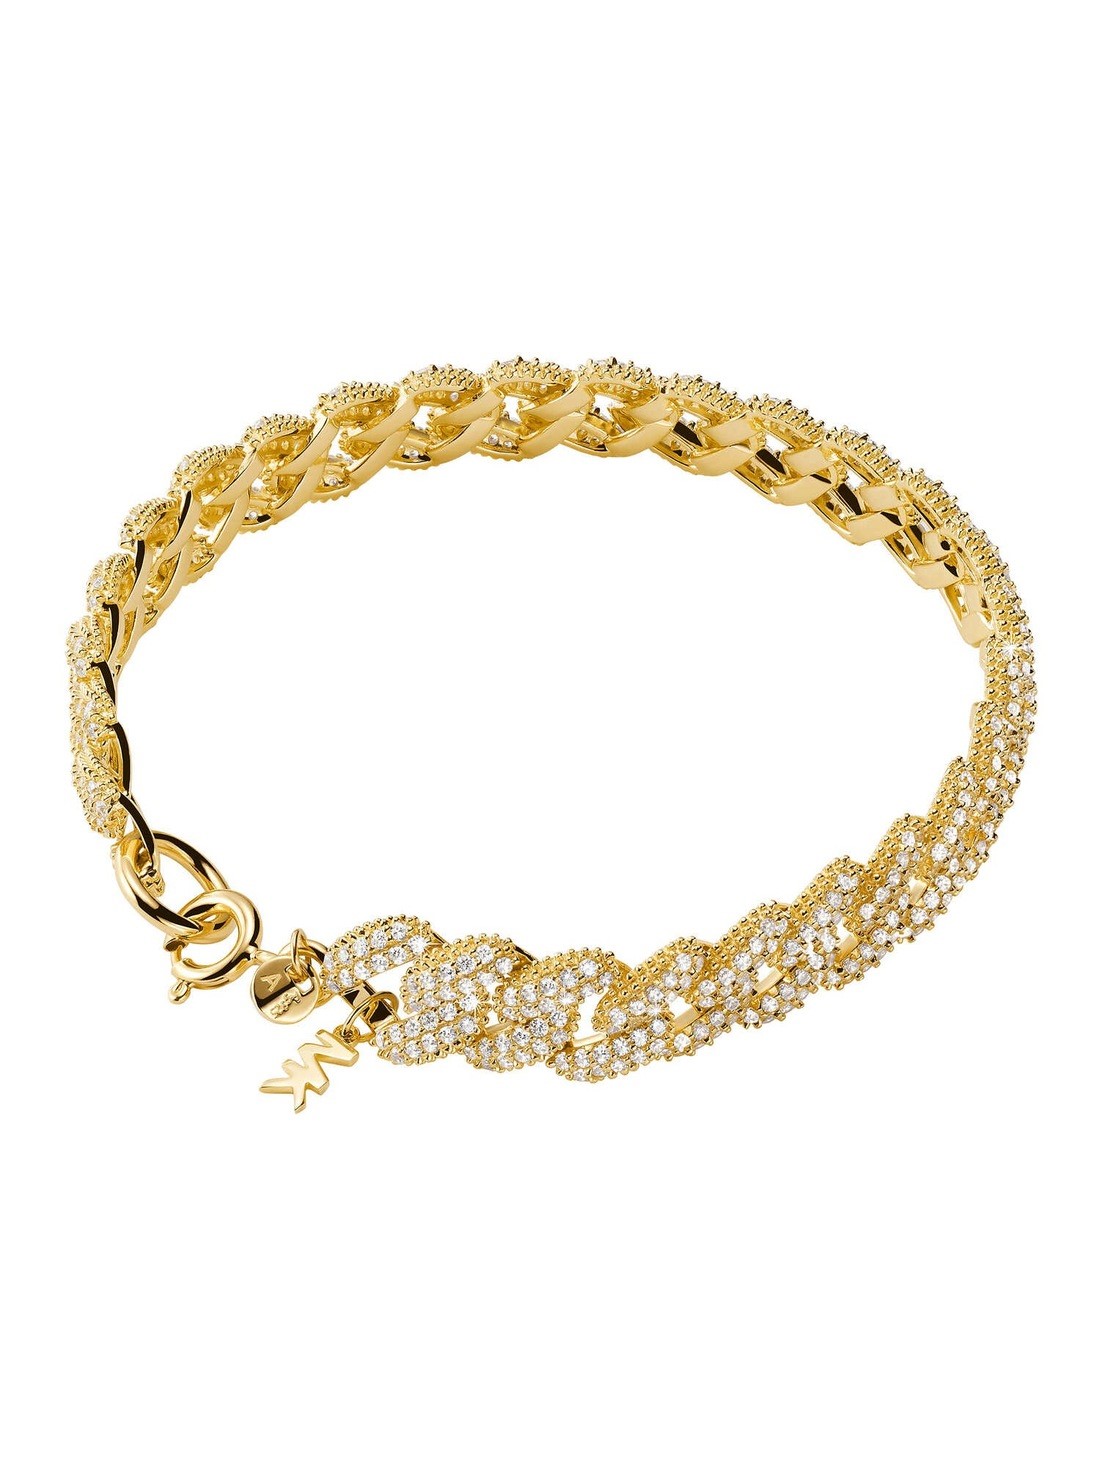 Gorgeous Michael Kors Diamond Bracelet - Perfect for Any Occasion